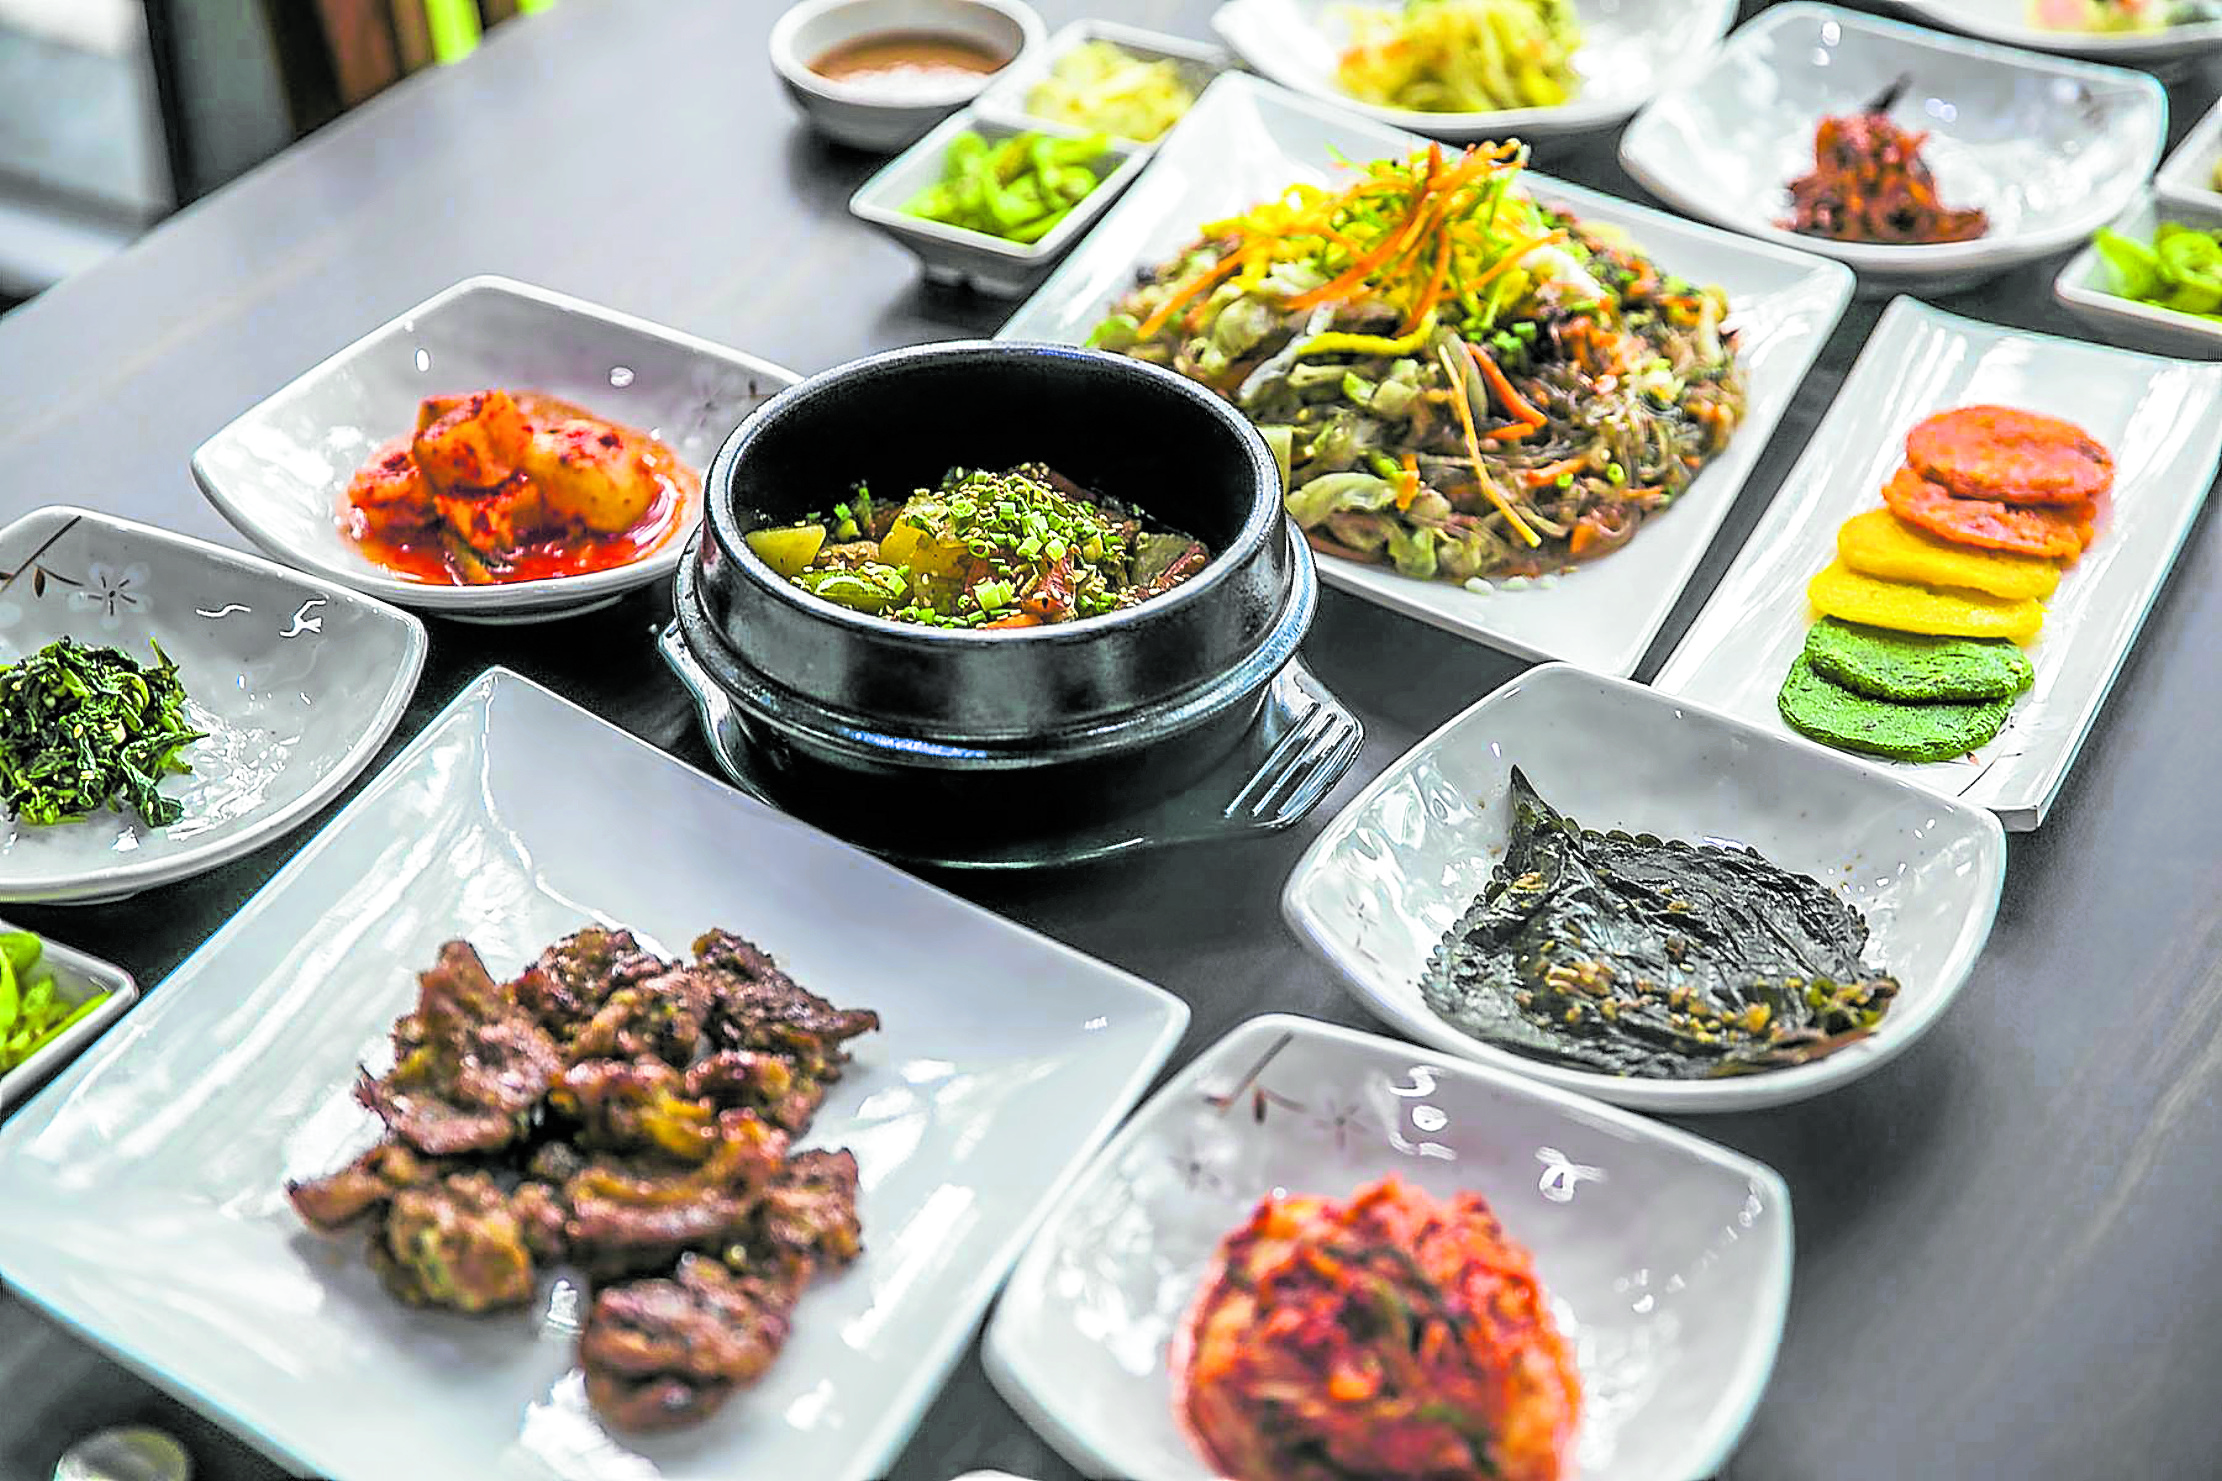 Authentic feel and tastes in Angeles City’s Korea Town